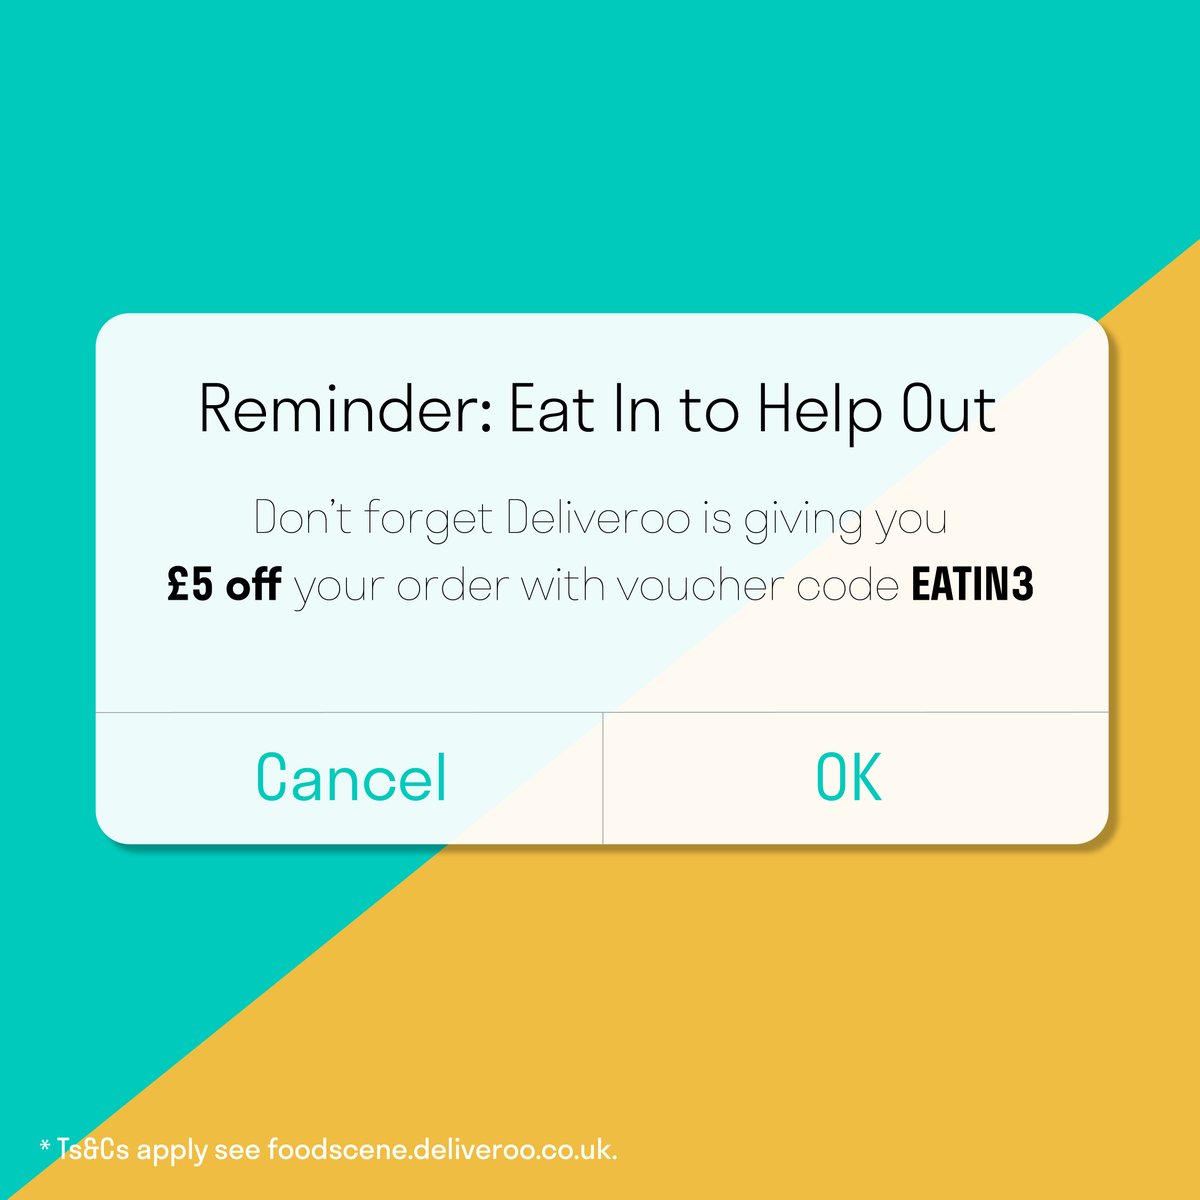 Deliveroo On Twitter This Week S Discount Code Is Eatin3 This Discount Code Is Valid Between 14 09 20 And 16 09 20 Free Delivery Available To New Customers Only And Can Be Used On Orders Over